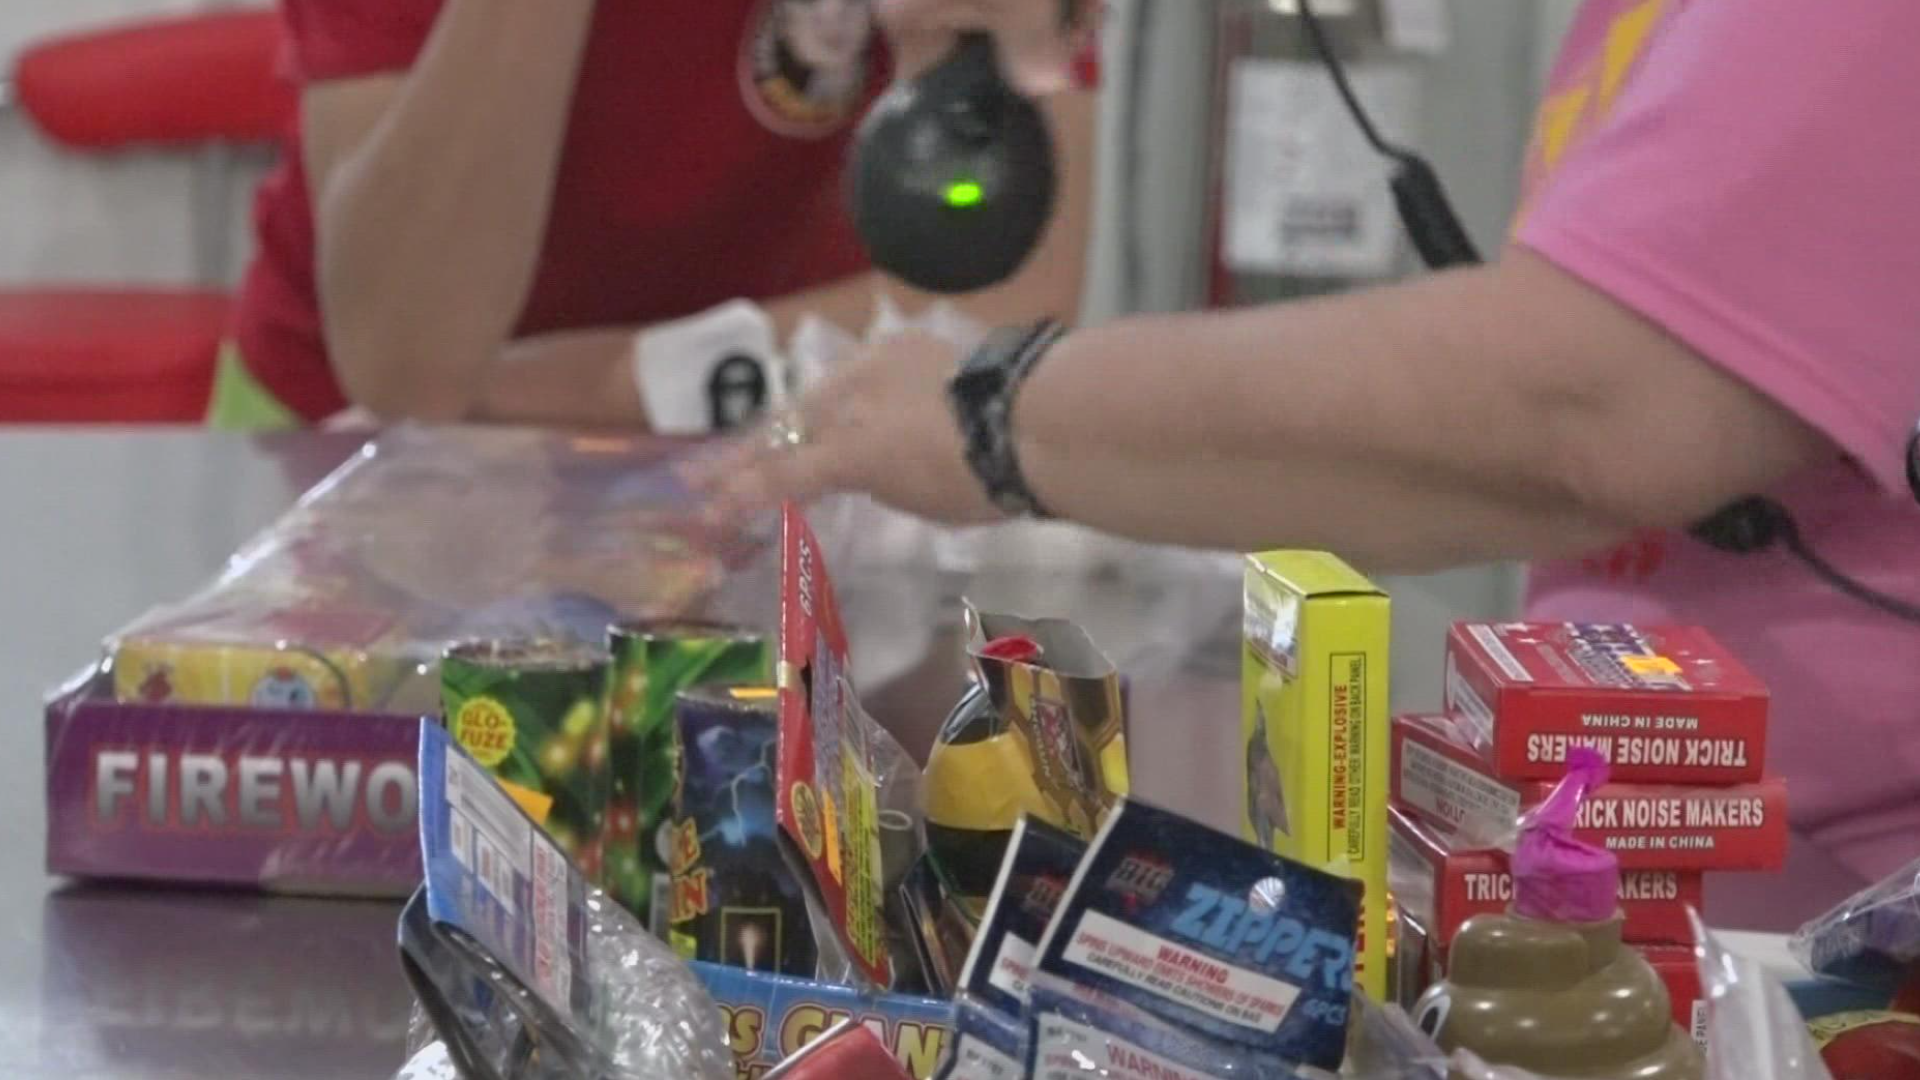 With the new law now in effect, businesses across state lines say they are selling far more to Ohioans who can legally set off fireworks in many areas of the state.